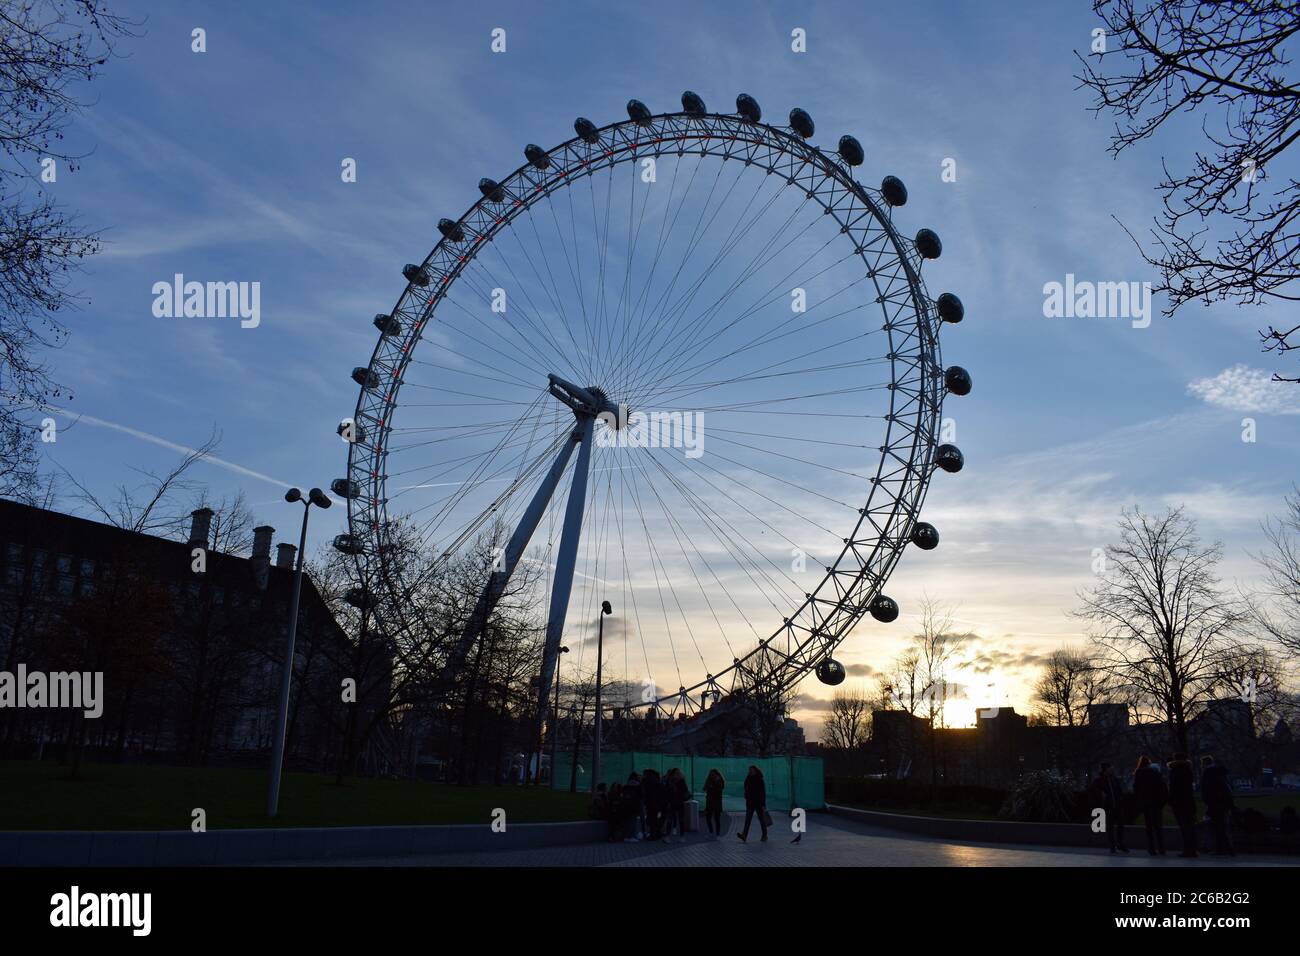 The London Eye at sunset along the South Bank of the River Thames.  A group of people can be seen by a green temporary fence below the wheel. Stock Photo